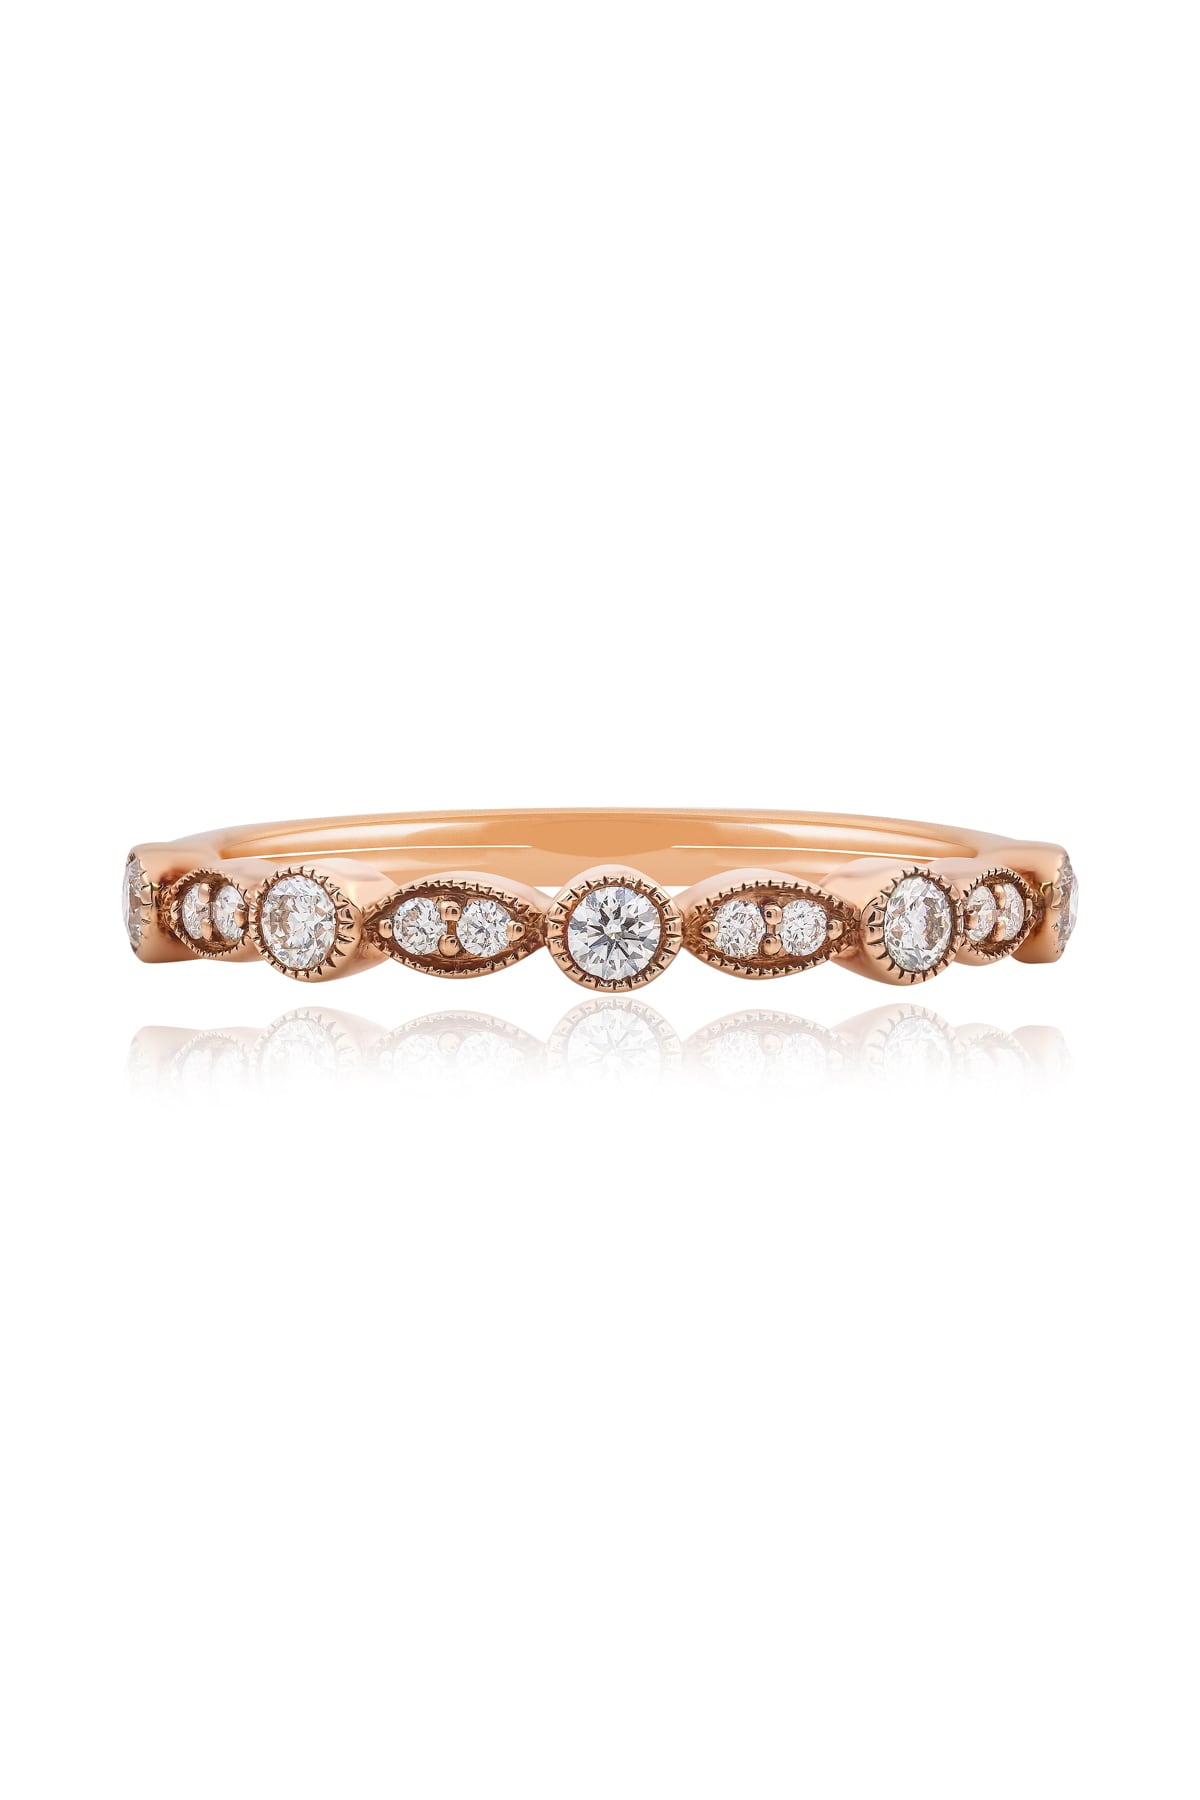 Marquise Shaped Diamond Band In Rose Gold from LeGassick.